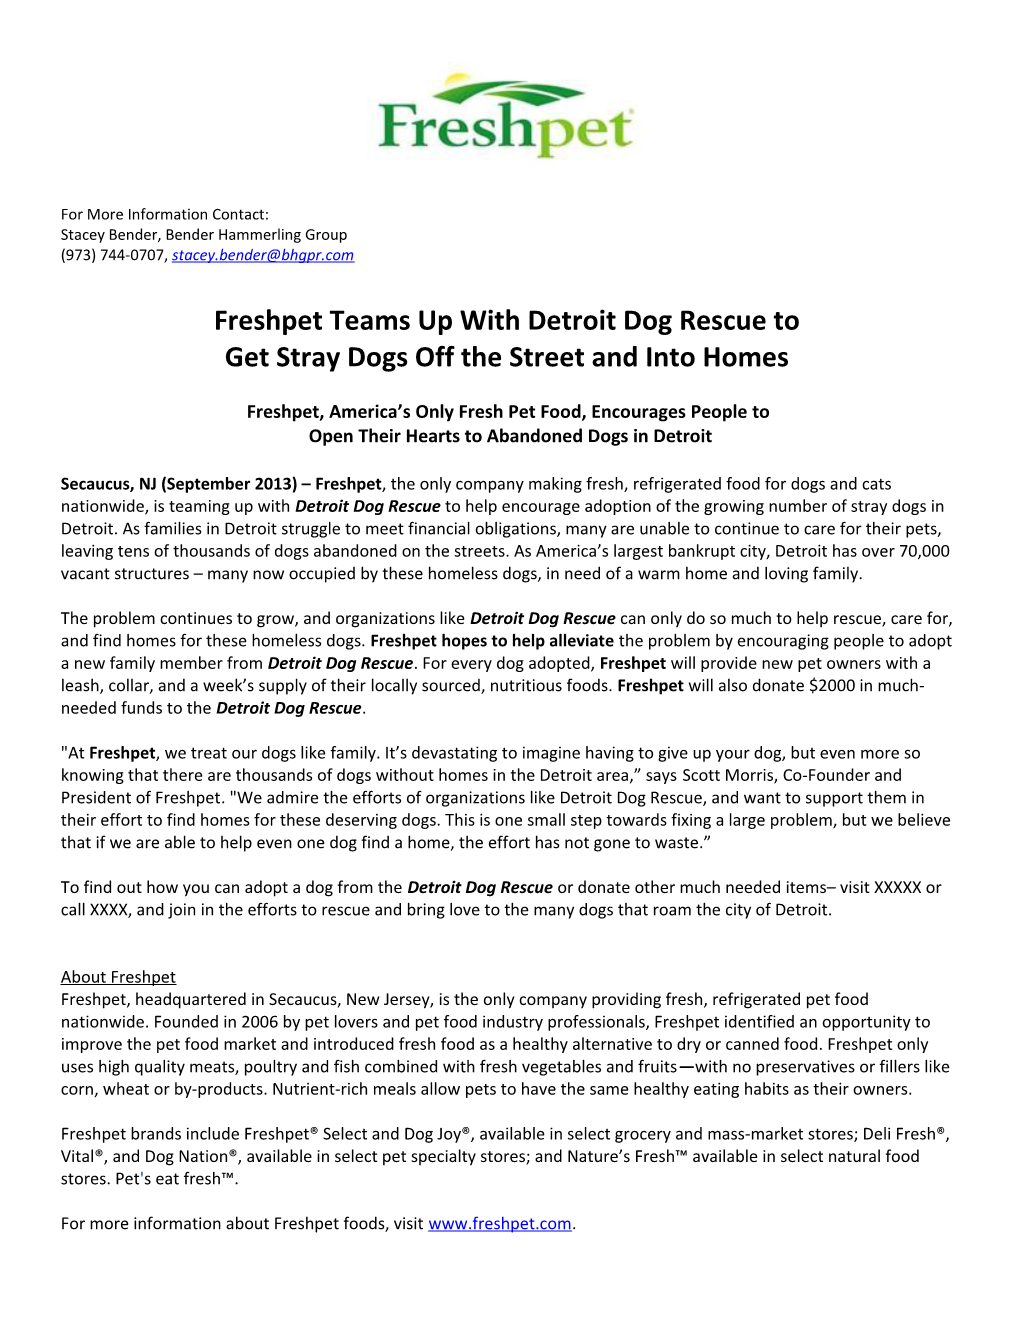 Freshpet Teams up with Detroit Dog Rescueto